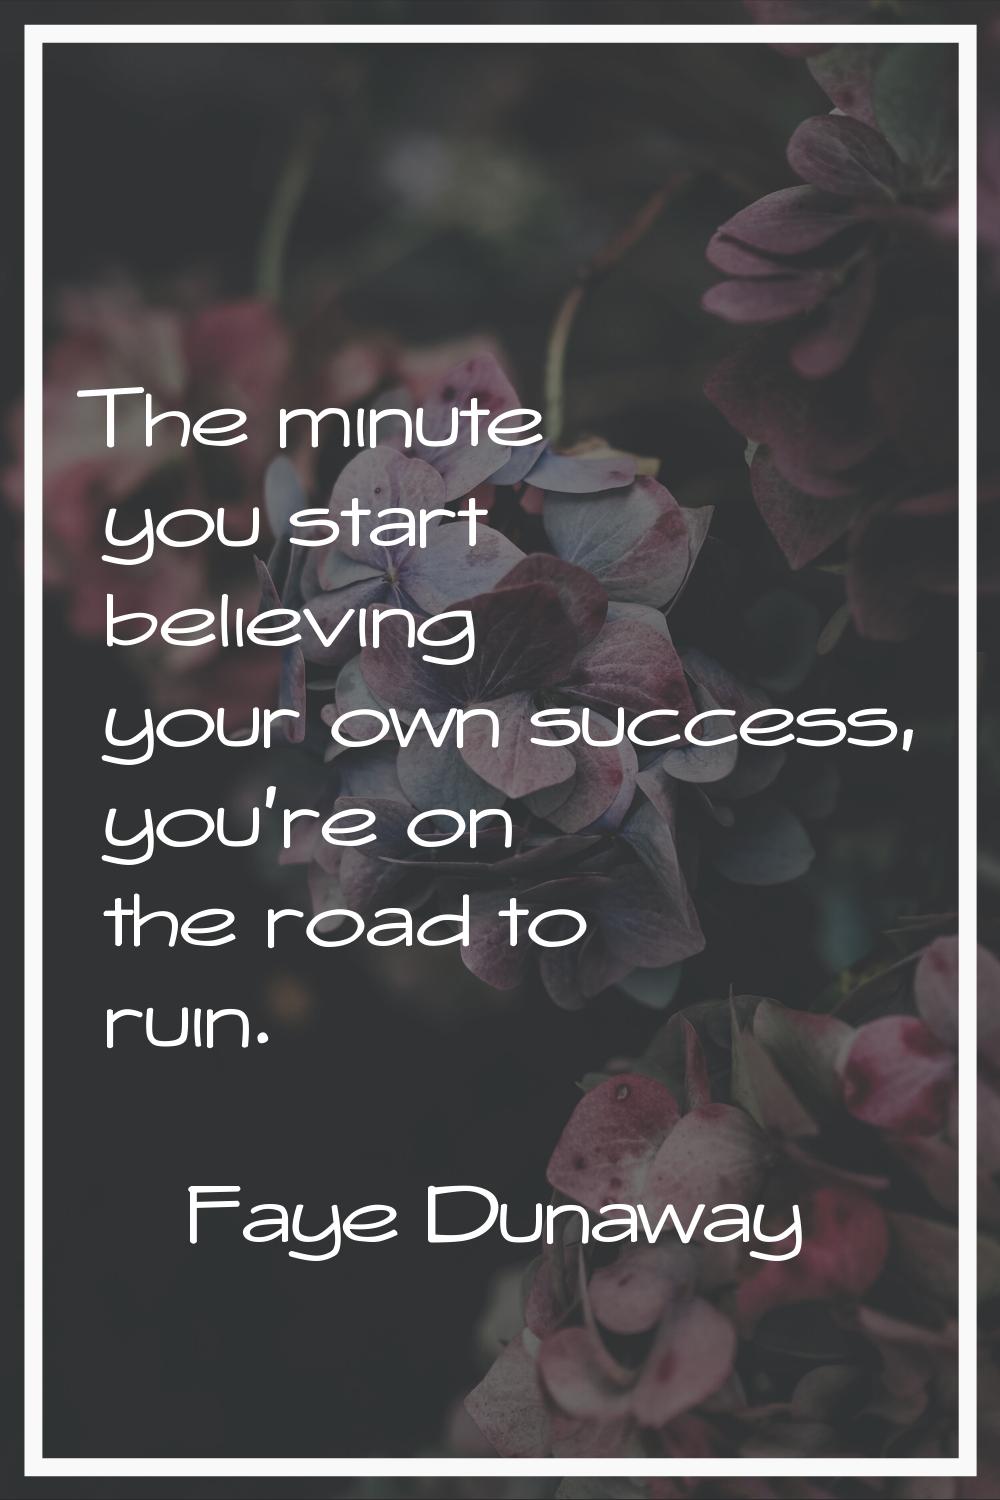 The minute you start believing your own success, you're on the road to ruin.